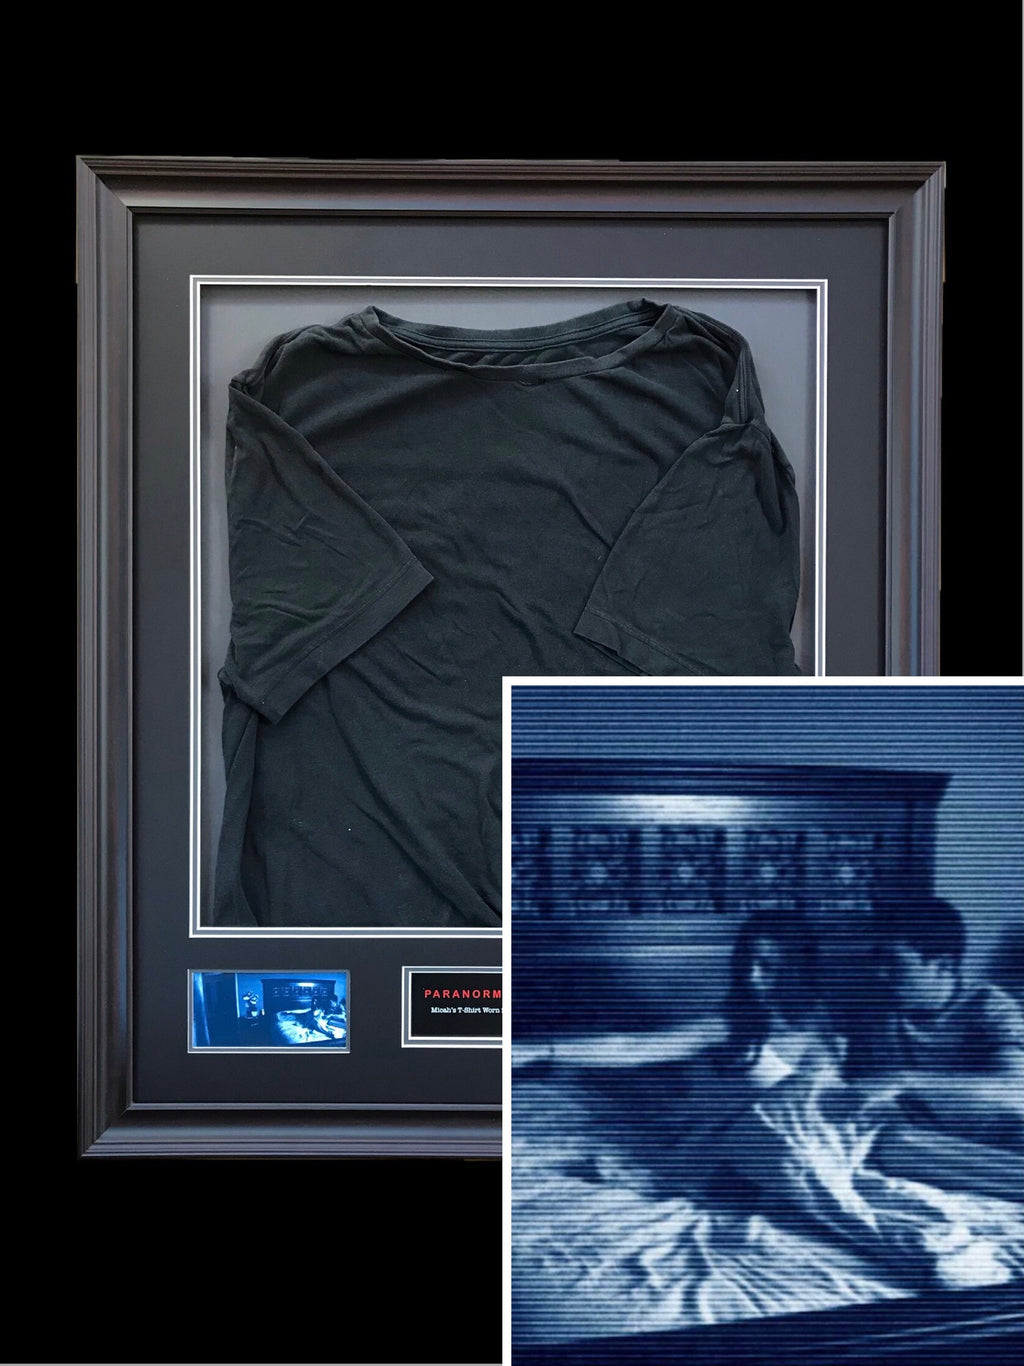 Paranormal Activity (2007) - Micah’s T-Shirt worn in the Film, with a Letter from the Actor